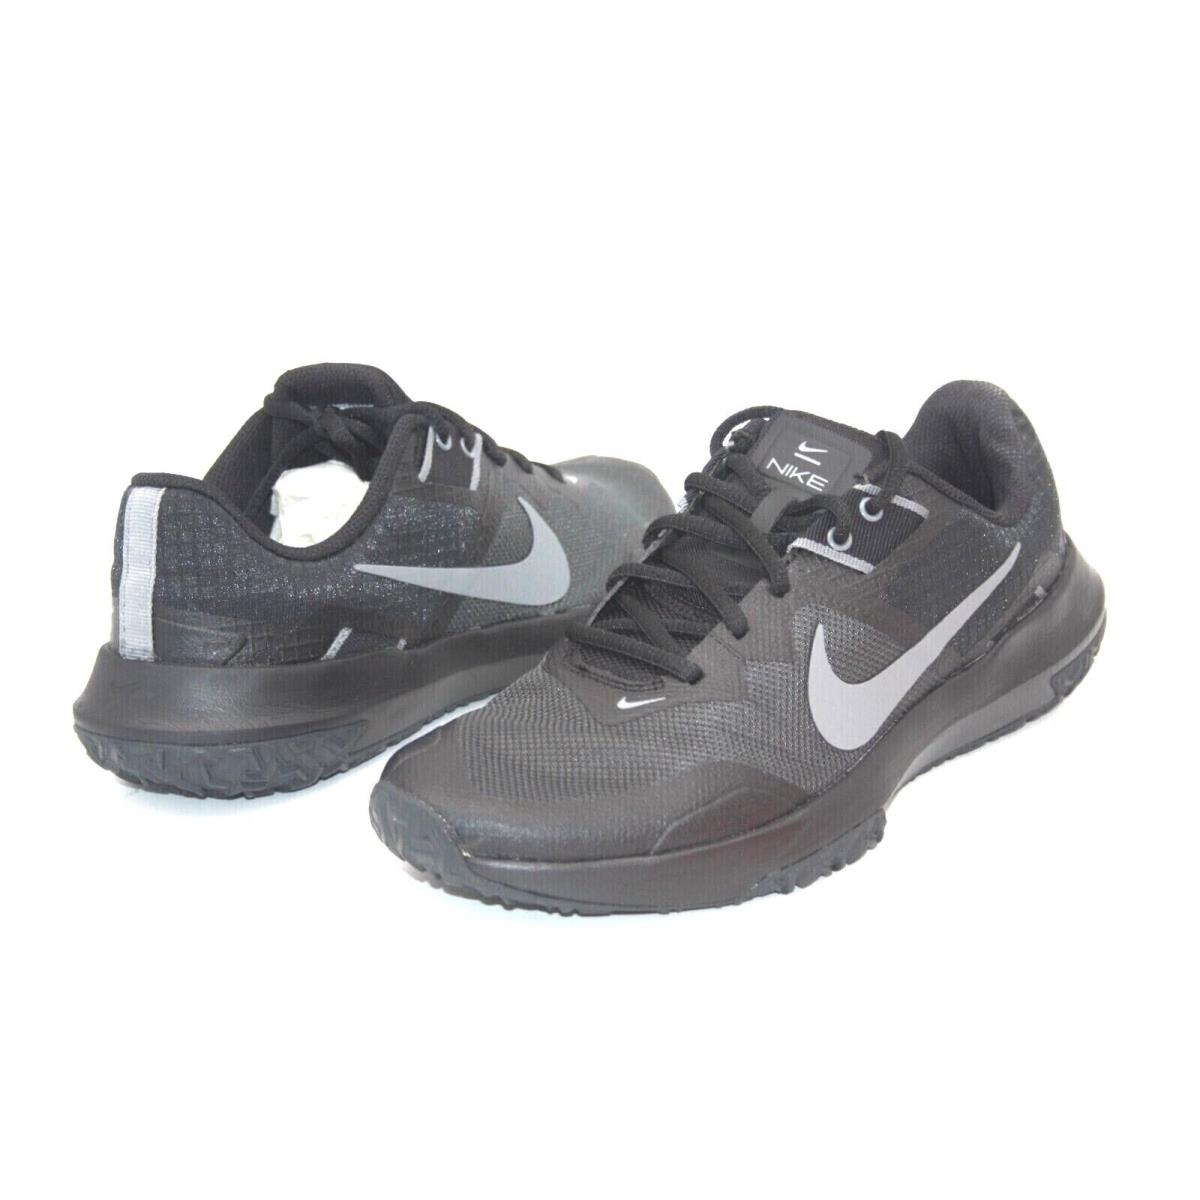 Nike shoes Varsity Compete - Gray 3